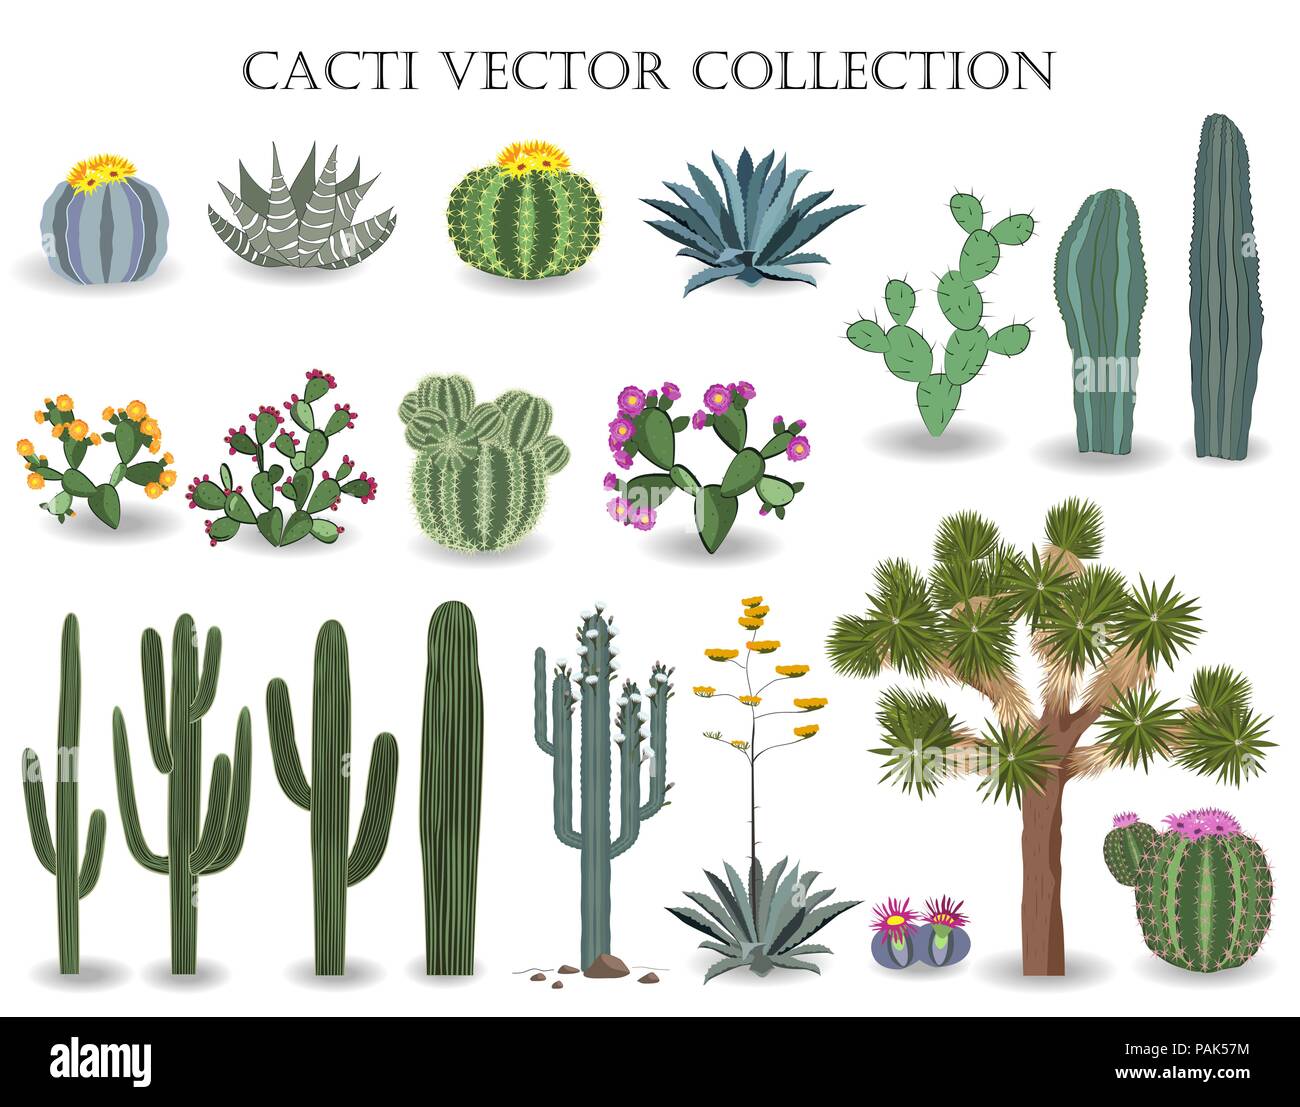 Cacti vector collection. Saguaro, agave, joshua tree, prickly pear and other cactuses Stock Vector